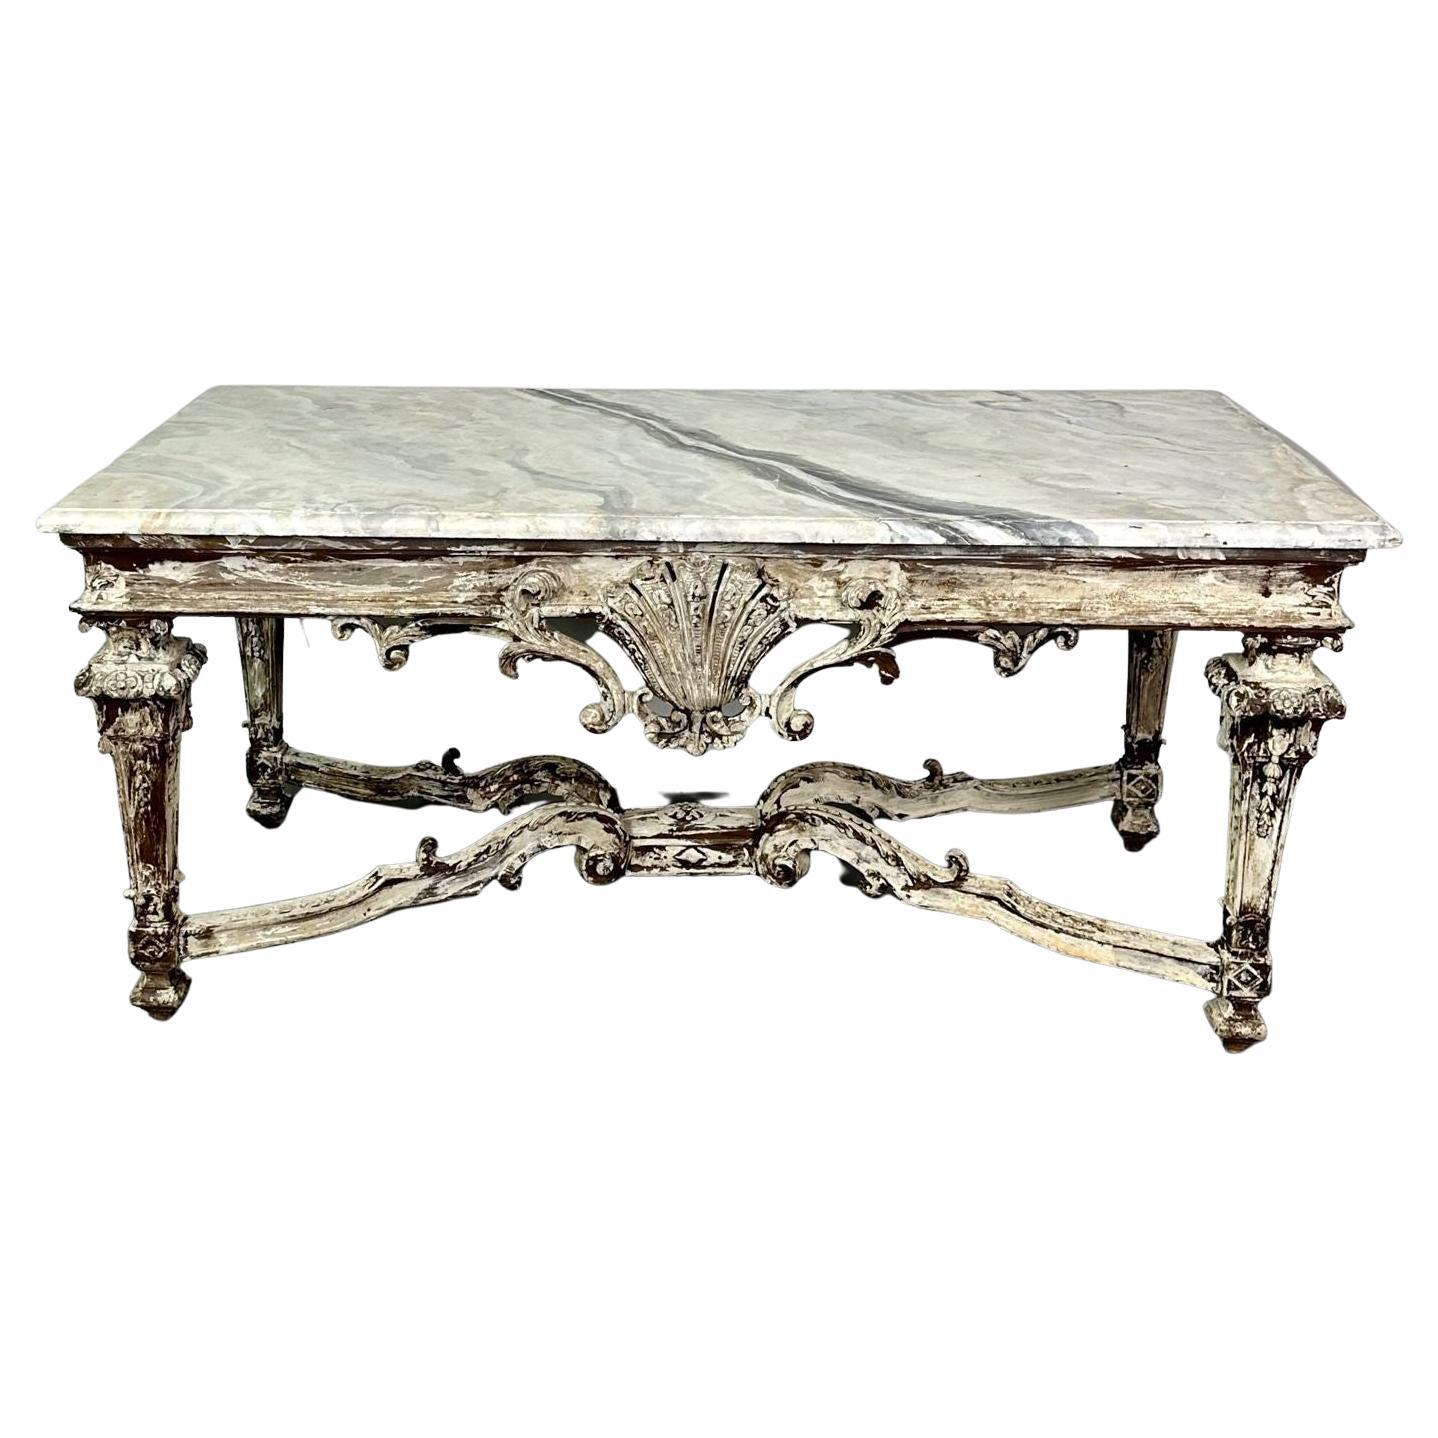 Italian Faux Marble Top Centre or Dining Table, Gustavian, Paint Distressed